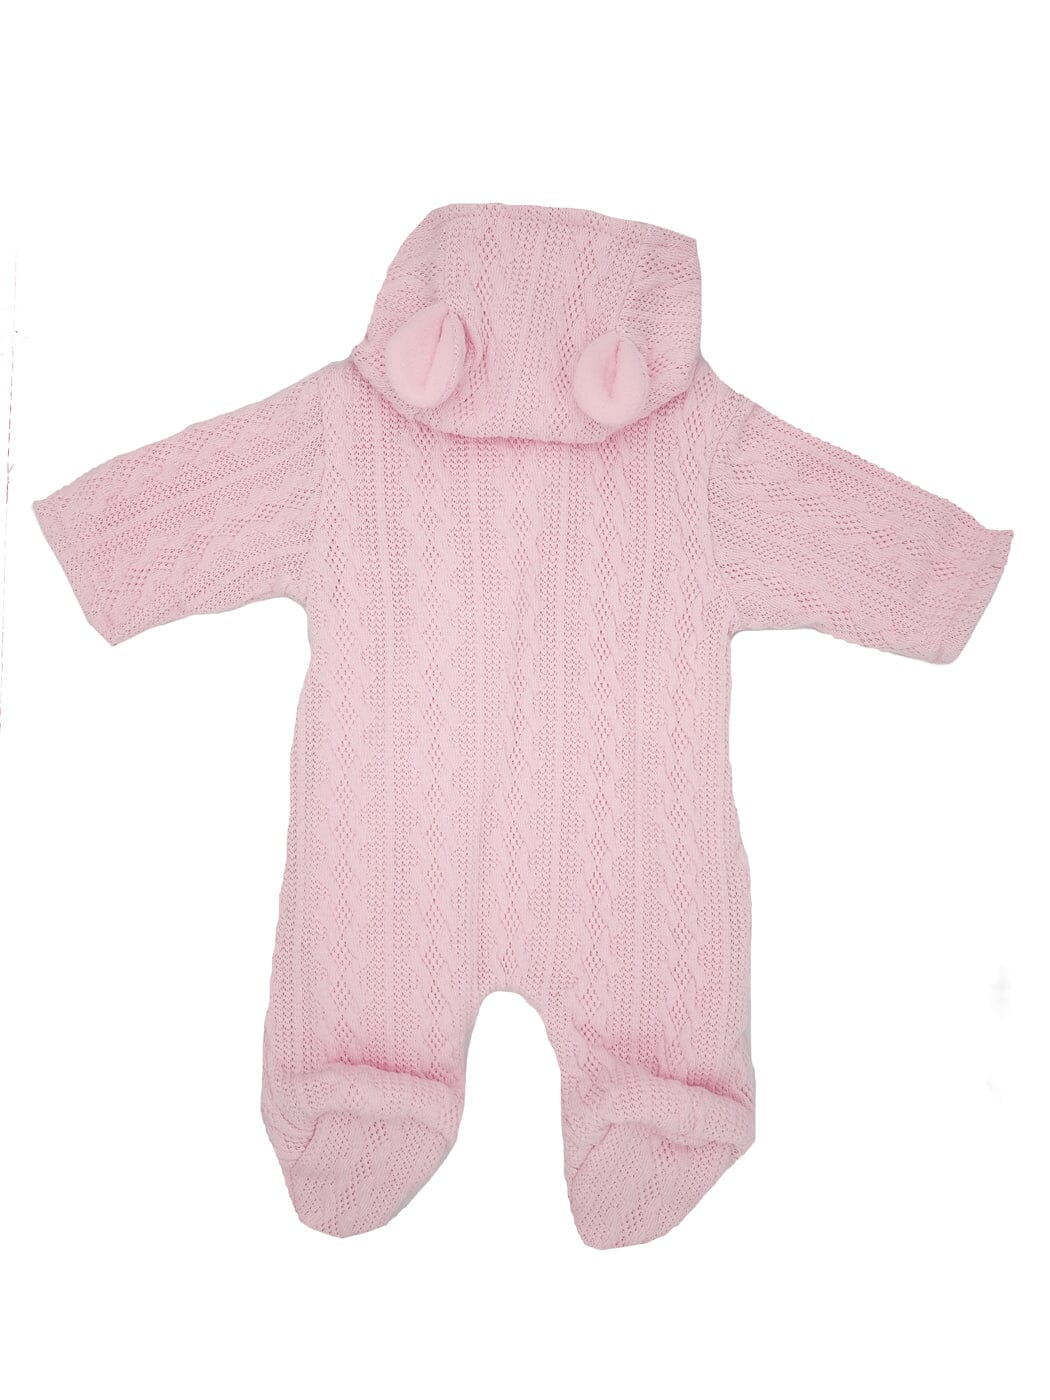 Knitted Tiny Baby Pramsuit With Bunny Ears - Pink Snowsuit / Pramsuit Tiny Baby 